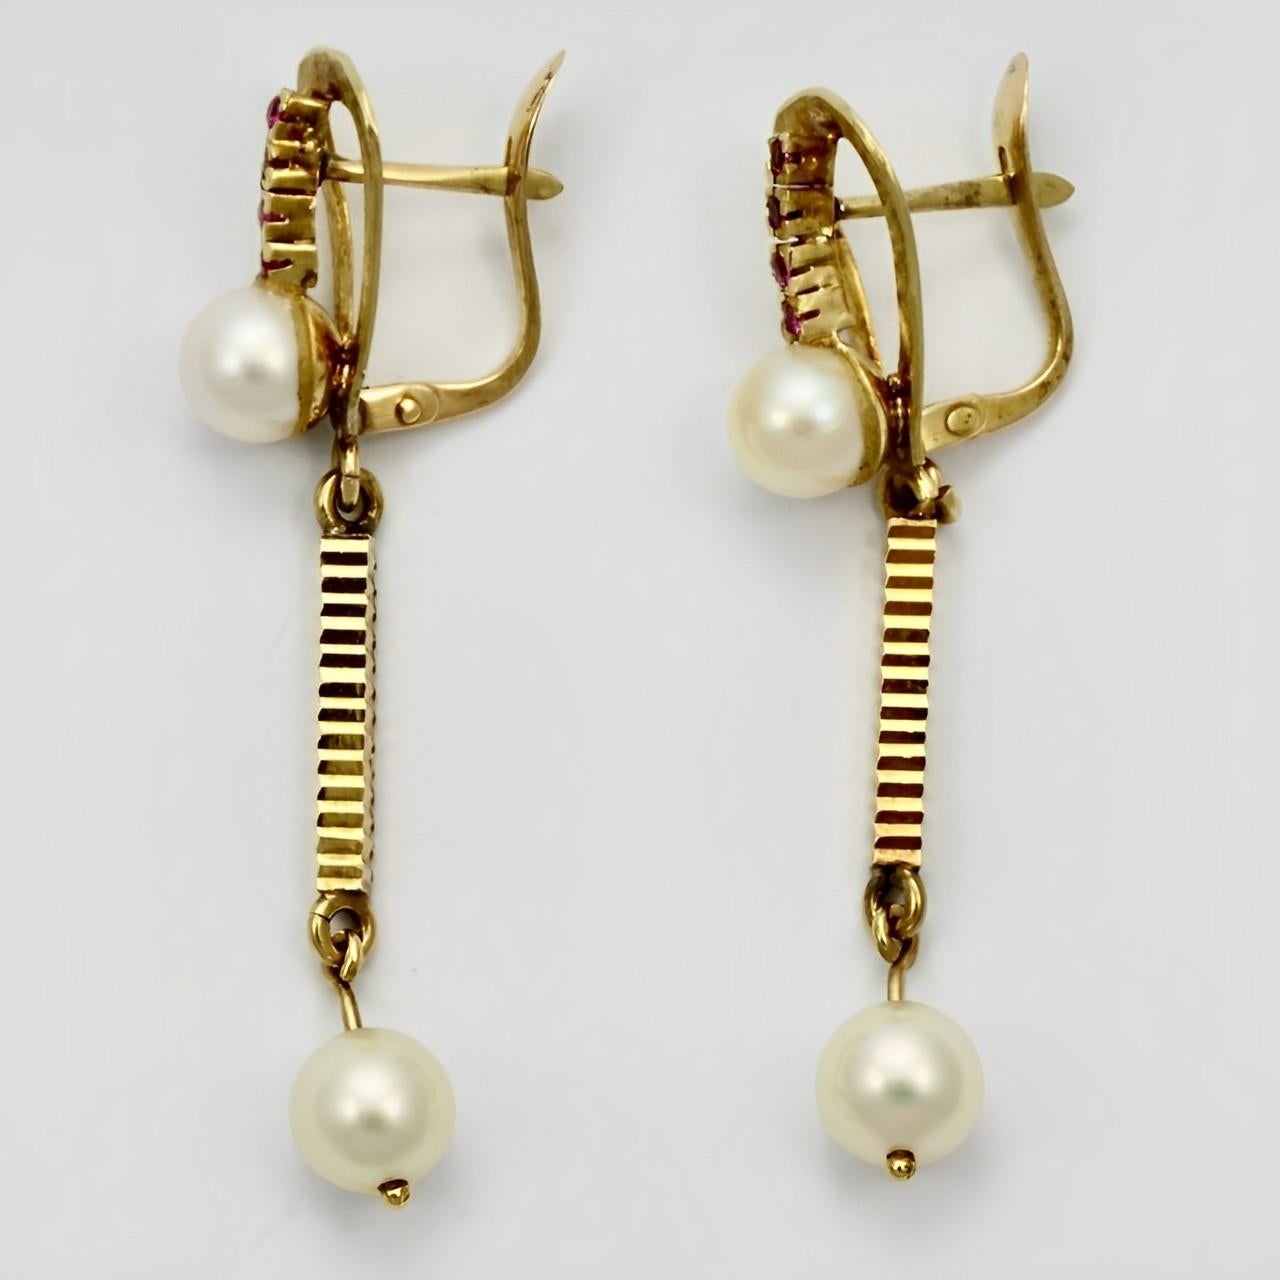 Beautiful 18K gold and ruby drop earrings with a pair of cultured pearls on each earring and a bar of rubies. The earrings have a lovely ridged and textured design. They test as 18K gold. Measuring length 4.4 cm / 1.73 inches.

This exquisite pair